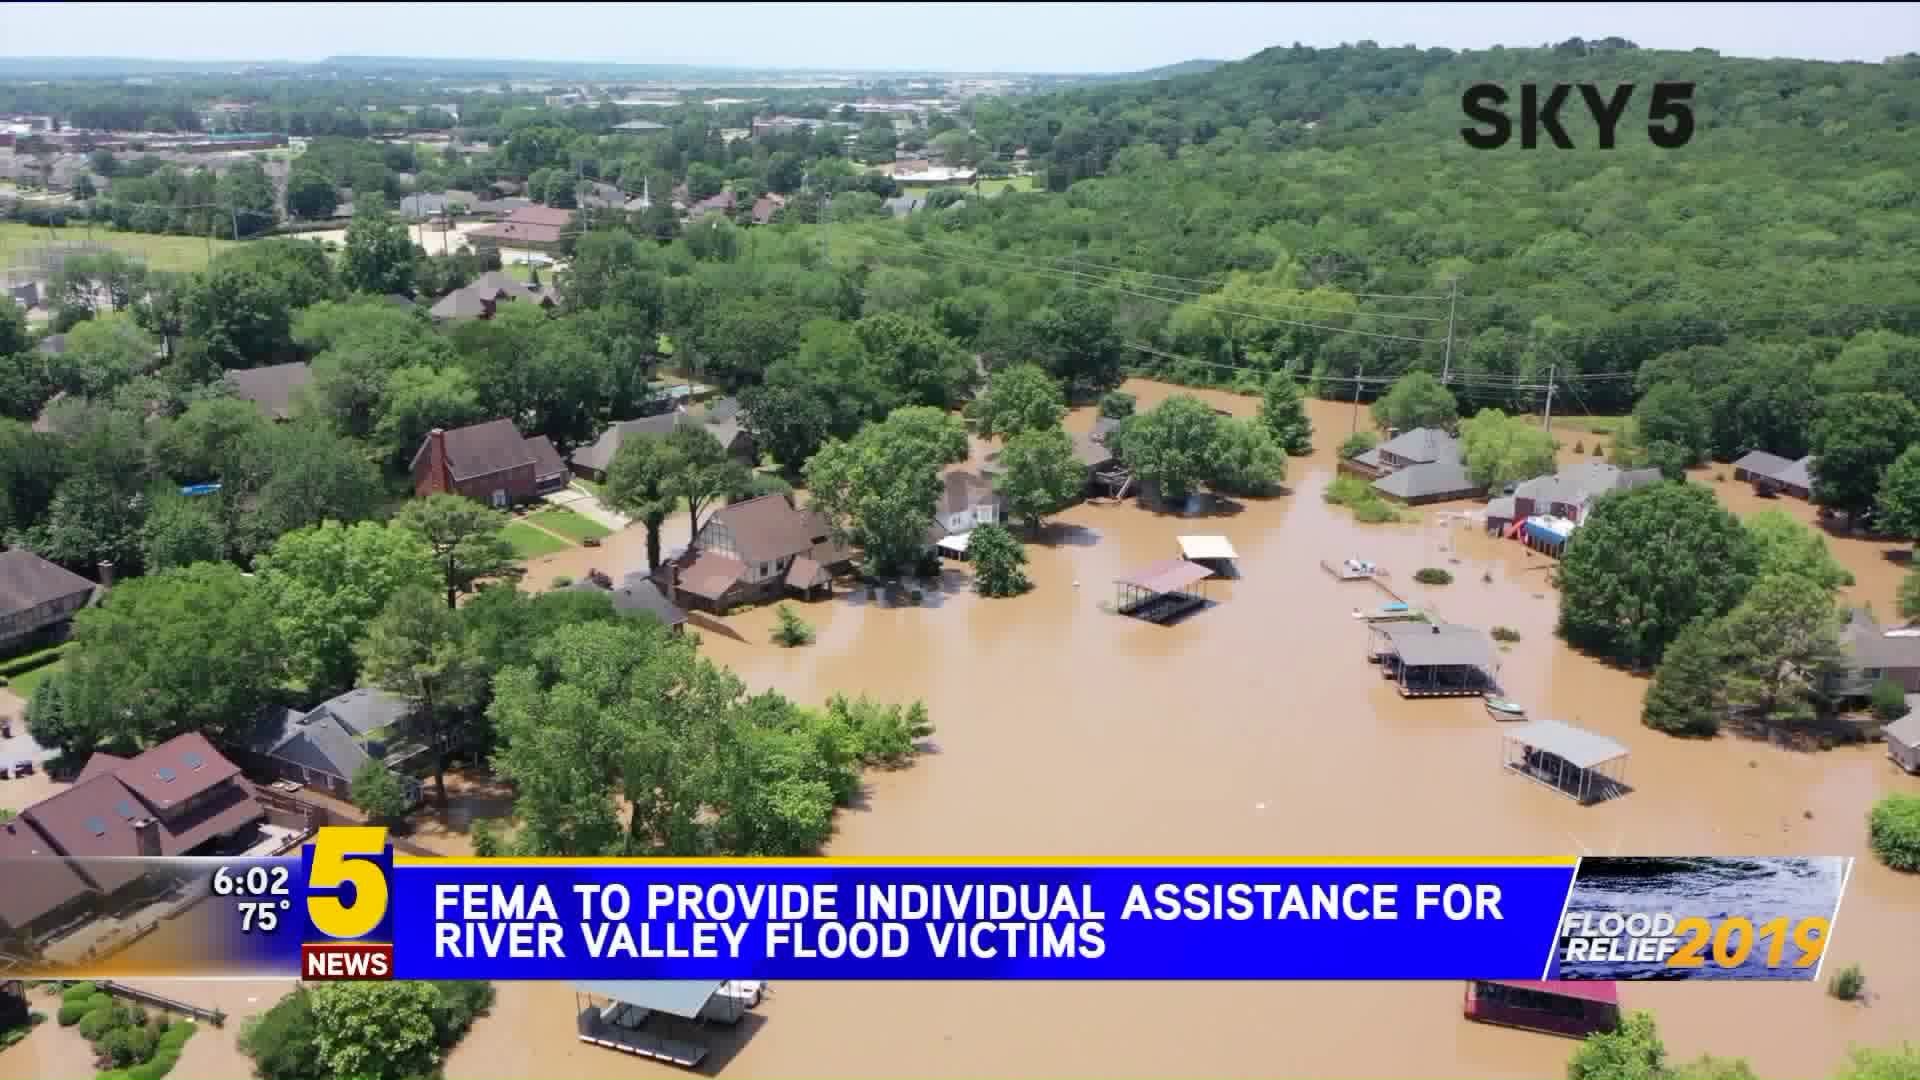 FEMA to Provide Individual Assistance for River Valley Flood Victims